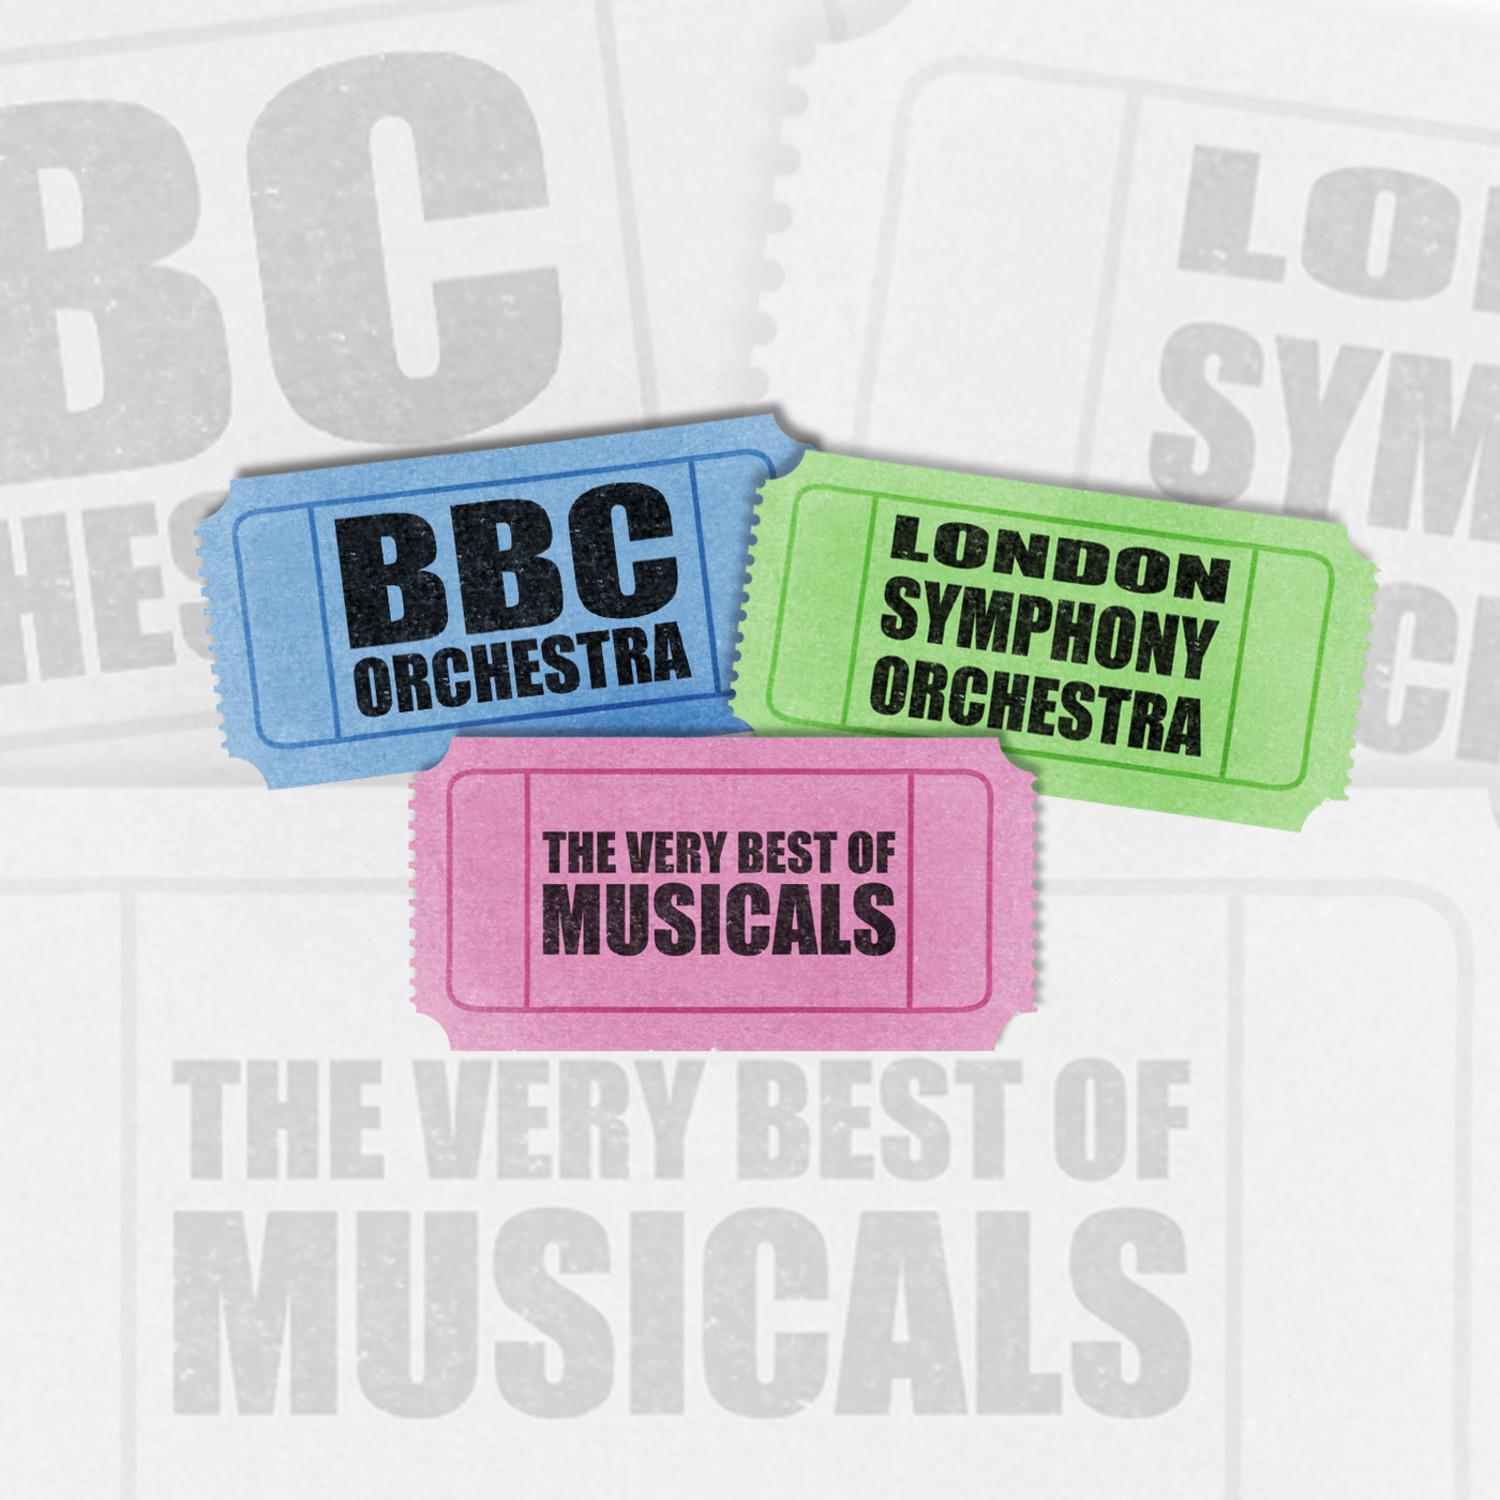 The Very Best Of Musicals